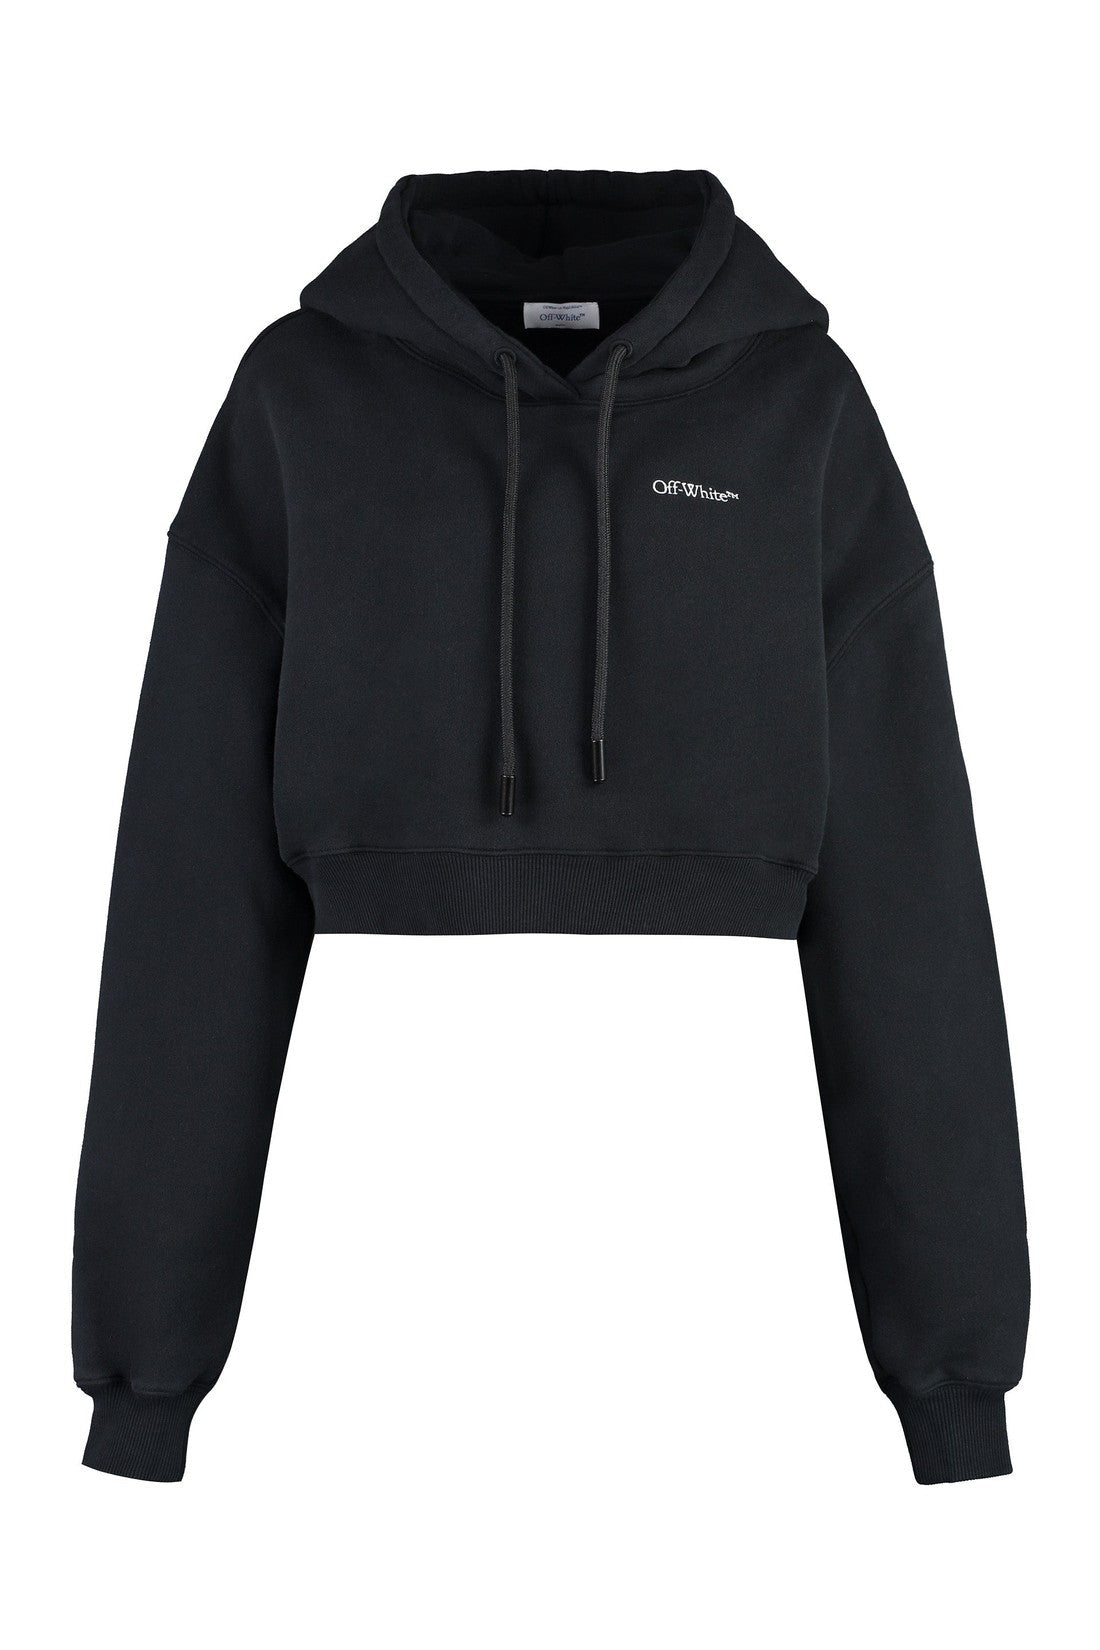 Off-White-OUTLET-SALE-Cropped hoodie-ARCHIVIST